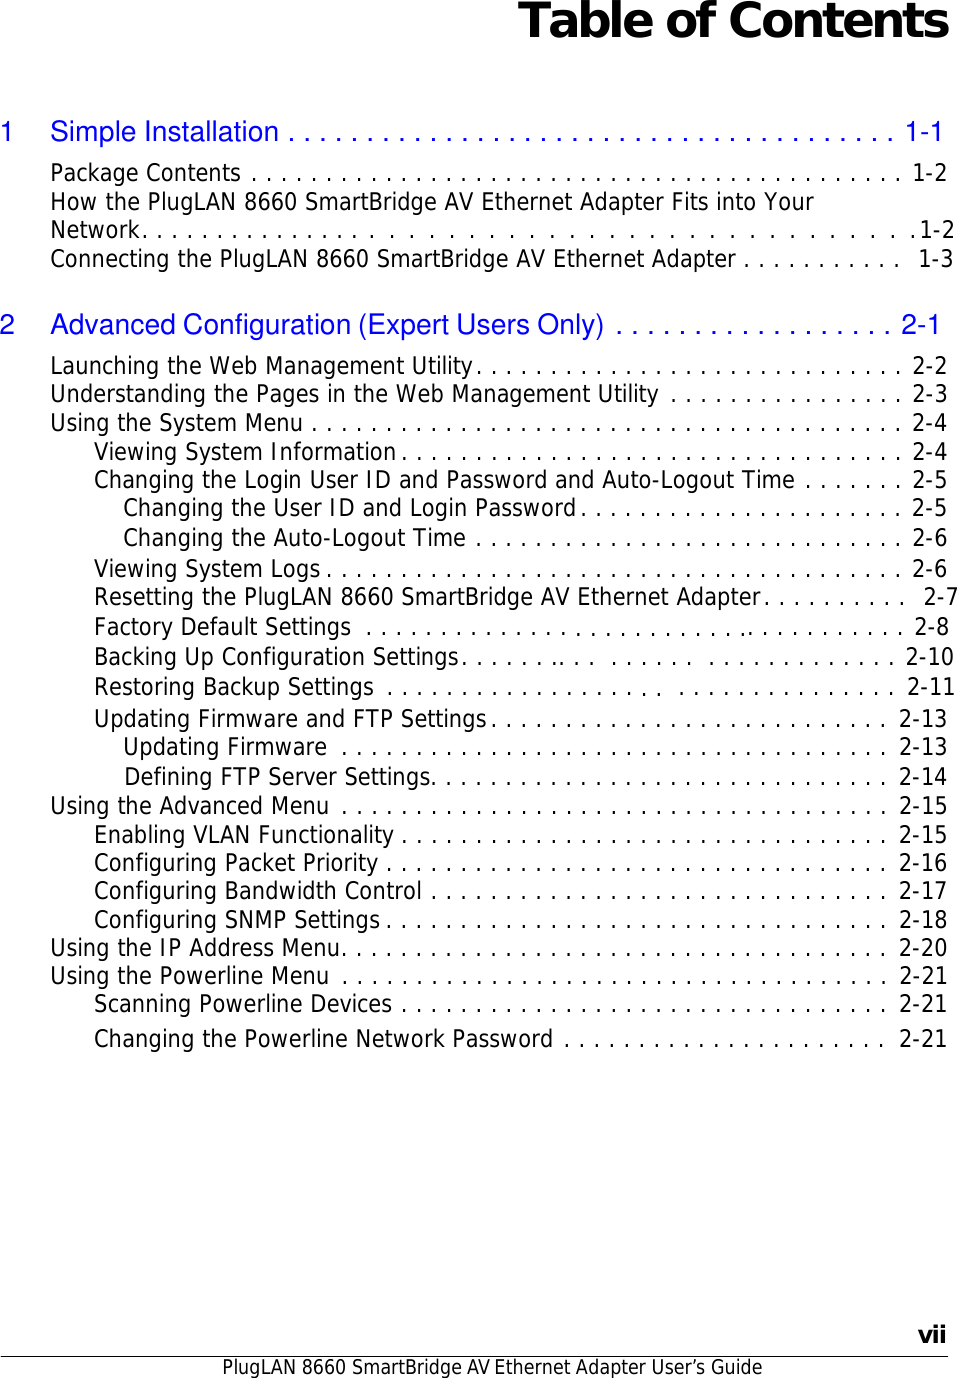 PlugLAN 8660 SmartBridge AV Ethernet Adapter User’s Guide   Table of Contents    1  Simple Installation . . . . . . . . . . . . . . . . . . . . . . . . . . . . . . . . . . . . . . . 1-1 Package Contents . . . . . . . . . . . . . . . . . . . . . . . . . . . . . . . . . . . . . . . . . . . . 1-2 How the PlugLAN 8660 SmartBridge AV Ethernet Adapter Fits into Your Network. . . . . . . . . . . . . . . . . . . . . . . . . . . . . . . . . . . . . . . . . . .1-2 Connecting the PlugLAN 8660 SmartBridge AV Ethernet Adapter . . . . . . . . . . .  1-3   2 Advanced Configuration (Expert Users Only) . . . . . . . . . . . . . . . . . . 2-1 Launching the Web Management Utility . . . . . . . . . . . . . . . . . . . . . . . . . . . . . 2-2 Understanding the Pages in the Web Management Utility . . . . . . . . . . . . . . . . 2-3 Using the System Menu . . . . . . . . . . . . . . . . . . . . . . . . . . . . . . . . . . . . . . . . 2-4 Viewing System Information . . . . . . . . . . . . . . . . . . . . . . . . . . . . . . . . . . 2-4 Changing the Login User ID and Password and Auto-Logout Time . . . . . . . 2-5 Changing the User ID and Login Password . . . . . . . . . . . . . . . . . . . . . . 2-5 Changing the Auto-Logout Time . . . . . . . . . . . . . . . . . . . . . . . . . . . . . 2-6 Viewing System Logs . . . . . . . . . . . . . . . . . . . . . . . . . . . . . . . . . . . . . . . 2-6 Resetting the PlugLAN 8660 SmartBridge AV Ethernet Adapter . . . . . . . . . .  2-7 Factory Default Settings  . . . . . . . . . . . . . . . . . . . . . . . . . .. . . . . . . . . . . 2-8 Backing Up Configuration Settings . . . . . . .. . .  . . . . . .  . . . . . . . . . . . . . 2-10 Restoring Backup Settings . . . . . . . . . . . . . . . . . . .  . . . . . . . . . . . . . . . 2-11 Updating Firmware and FTP Settings . . . . . . . . . . . . . . . . . . . . . . . . . . . 2-13 Updating Firmware  . . . . . . . . . . . . . . . . . . . . . . . . . . . . . . . . . . . . . 2-13     Defining FTP Server Settings. . . . . . . . . . . . . . . . . . . . . . . . . . . . . . . 2-14 Using the Advanced Menu . . . . . . . . . . . . . . . . . . . . . . . . . . . . . . . . . . . . . 2-15 Enabling VLAN Functionality . . . . . . . . . . . . . . . . . . . . . . . . . . . . . . . . . 2-15 Configuring Packet Priority . . . . . . . . . . . . . . . . . . . . . . . . . . . . . . . . . . 2-16 Configuring Bandwidth Control . . . . . . . . . . . . . . . . . . . . . . . . . . . . . . . 2-17 Configuring SNMP Settings . . . . . . . . . . . . . . . . . . . . . . . . . . . . . . . . . . 2-18 Using the IP Address Menu. . . . . . . . . . . . . . . . . . . . . . . . . . . . . . . . . . . . . 2-20 Using the Powerline Menu . . . . . . . . . . . . . . . . . . . . . . . . . . . . . . . . . . . . . 2-21 Scanning Powerline Devices . . . . . . . . . . . . . . . . . . . . . . . . . . . . . . . . . 2-21 Changing the Powerline Network Password . . . . . . . . . . . . . . . . . . . . . .  2-21               vii 